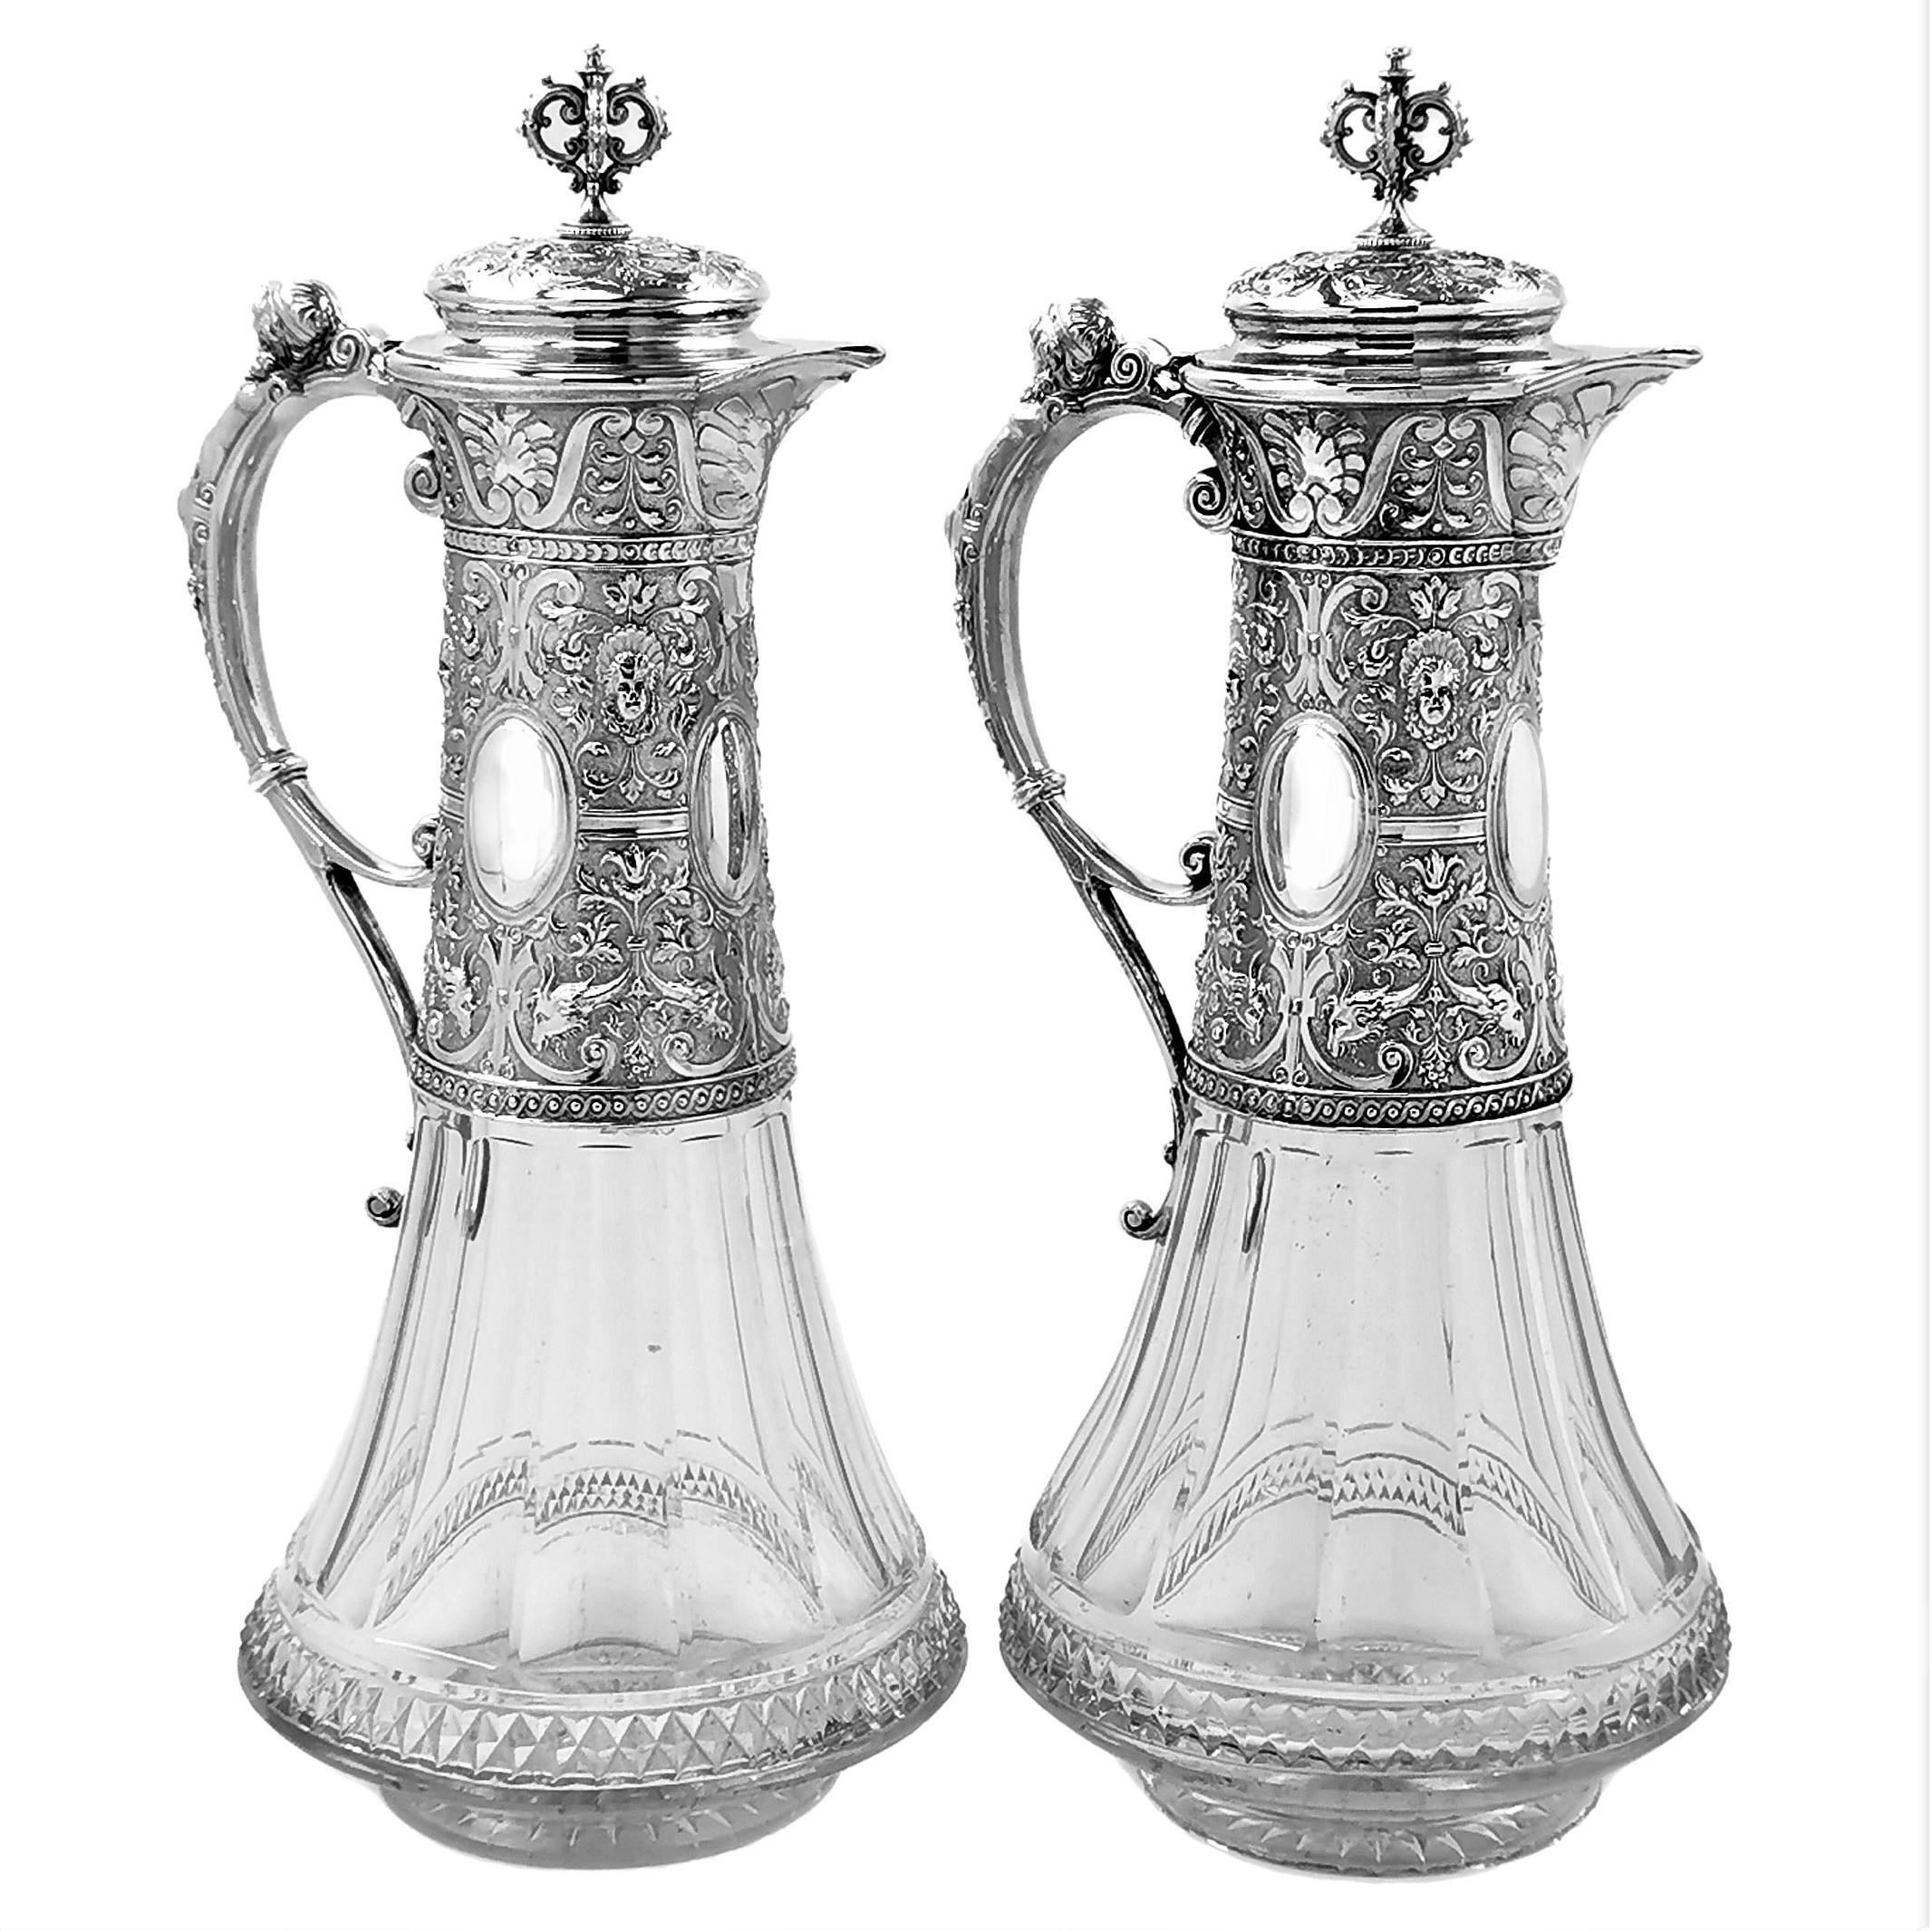 A pair of beautiful Antique German solid Silver mounted Cut Glass Claret Jugs. The Wine Jugs have tapered bases decorated with elegant cut glass patterns. The Wine Jugs have tall sterling Silver necks, with silver lids and curved handles. The Necks